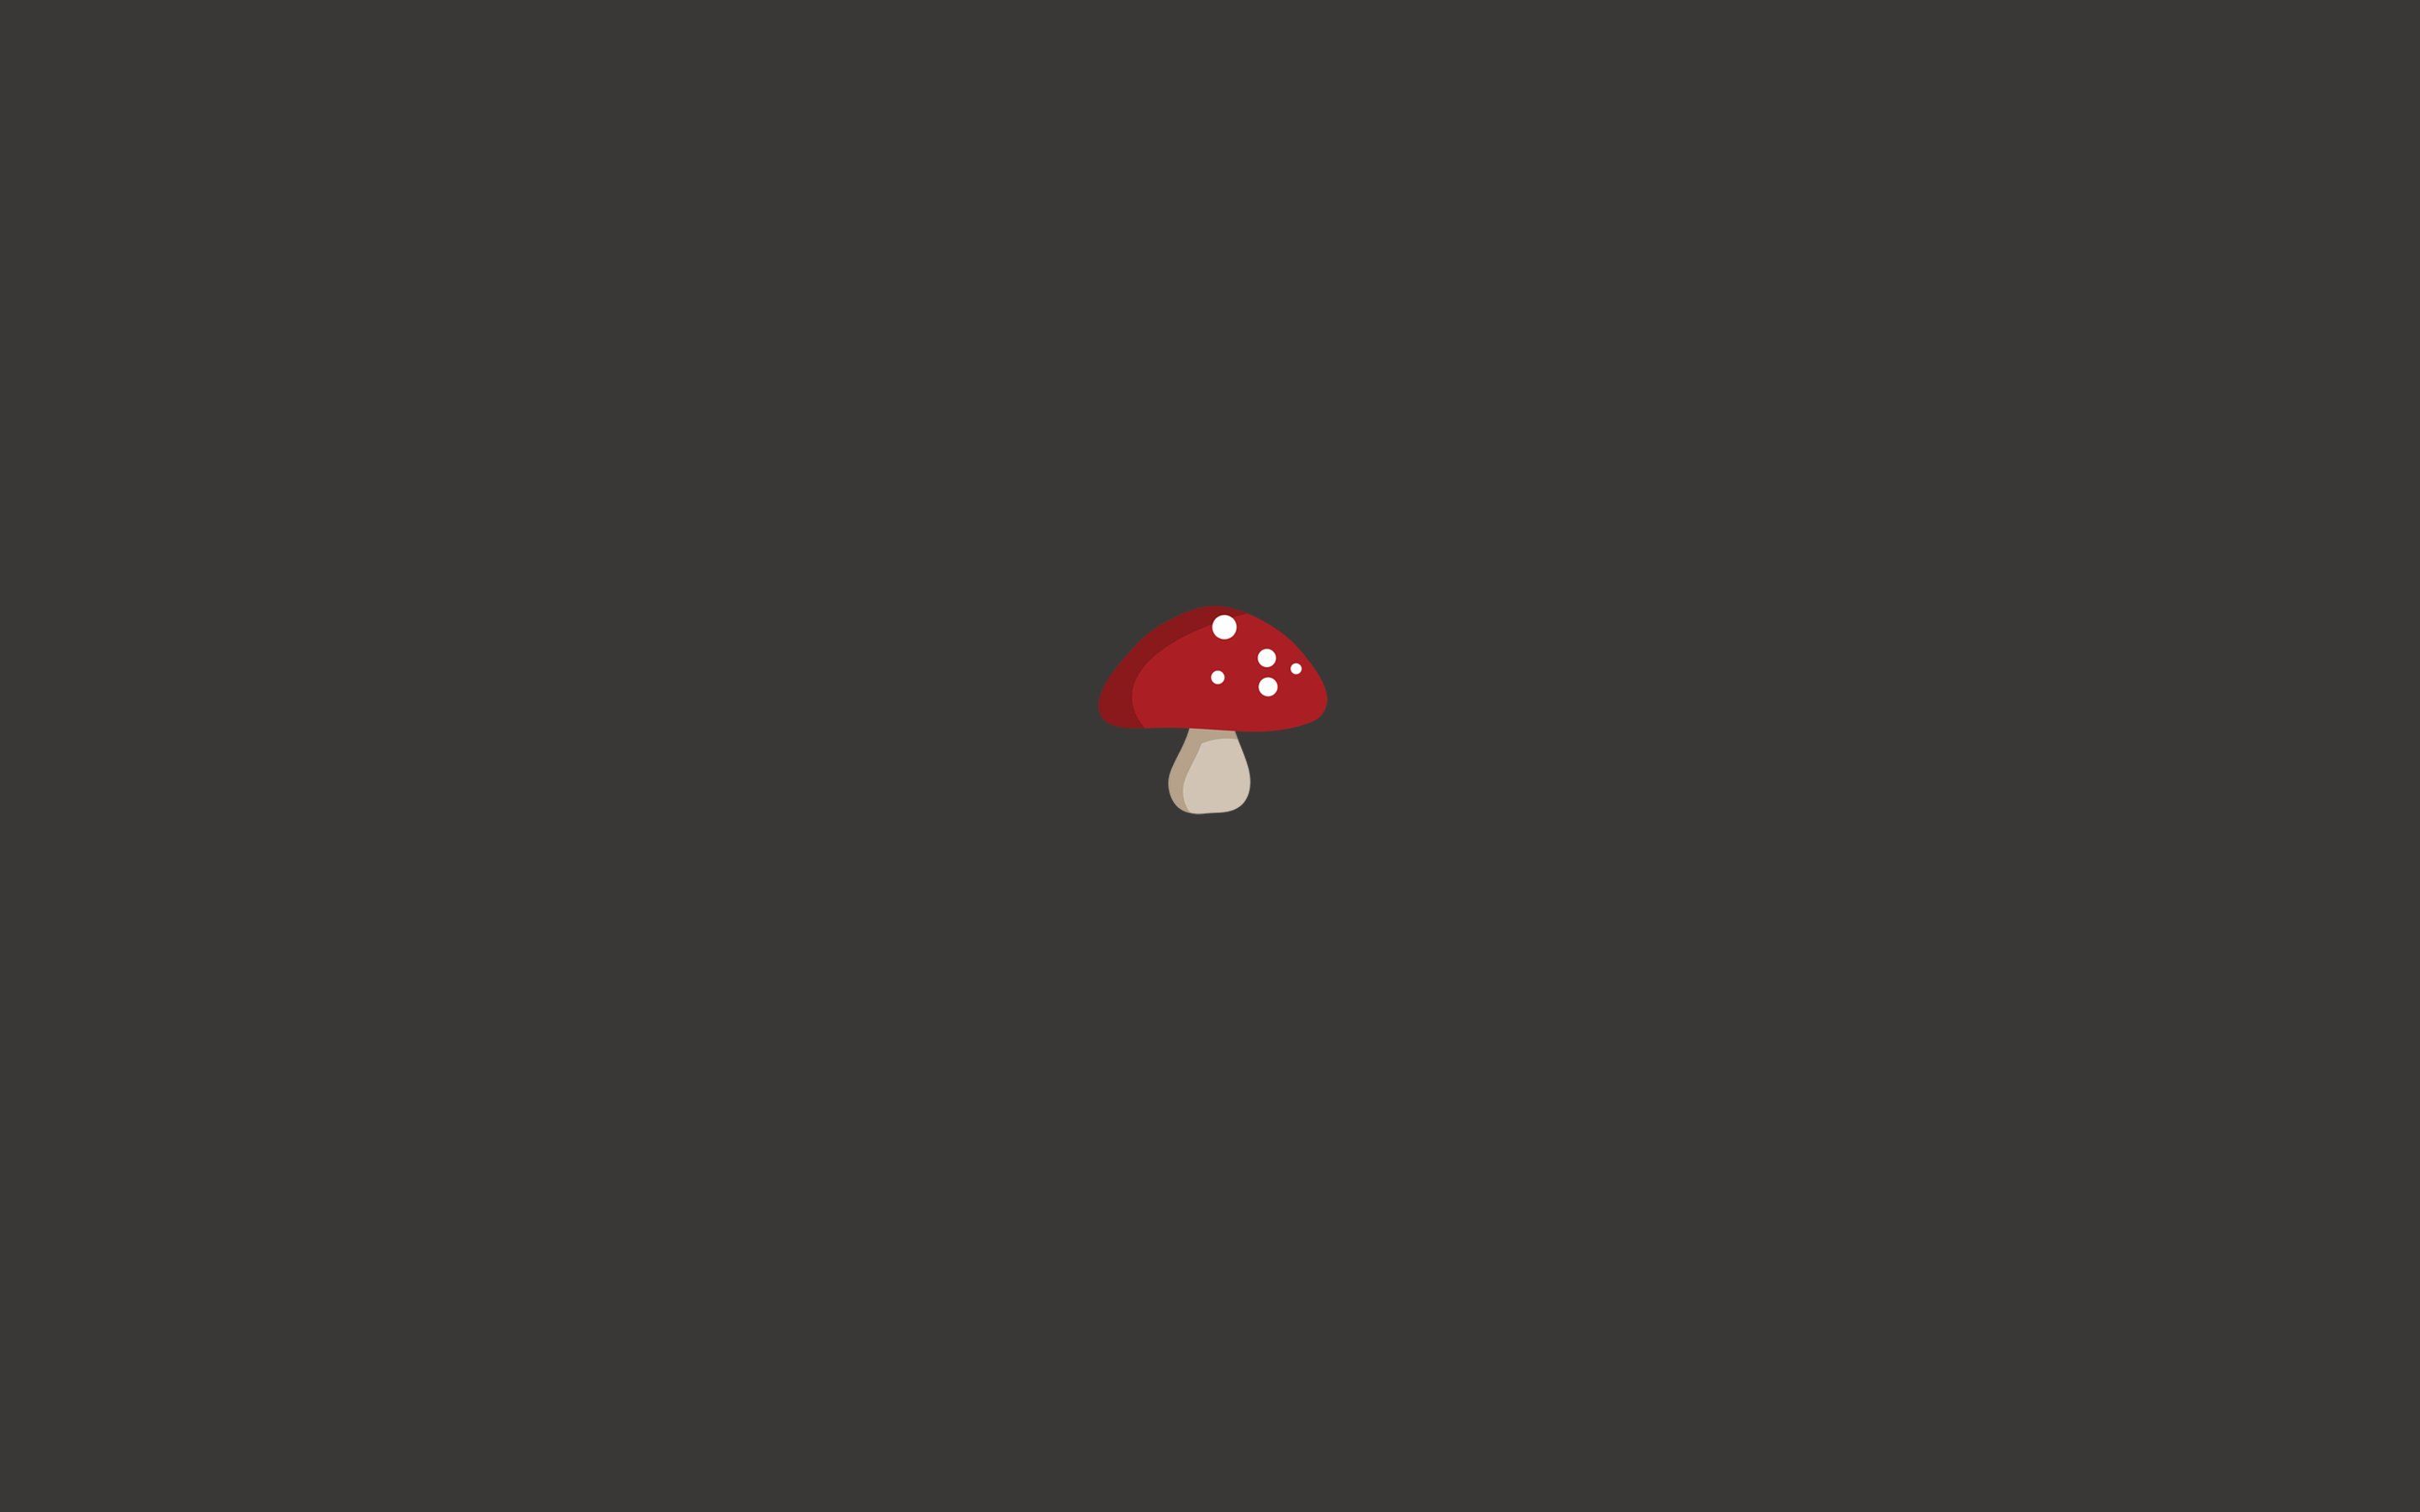 20 Top mushroom wallpaper aesthetic laptop You Can Save It free ...